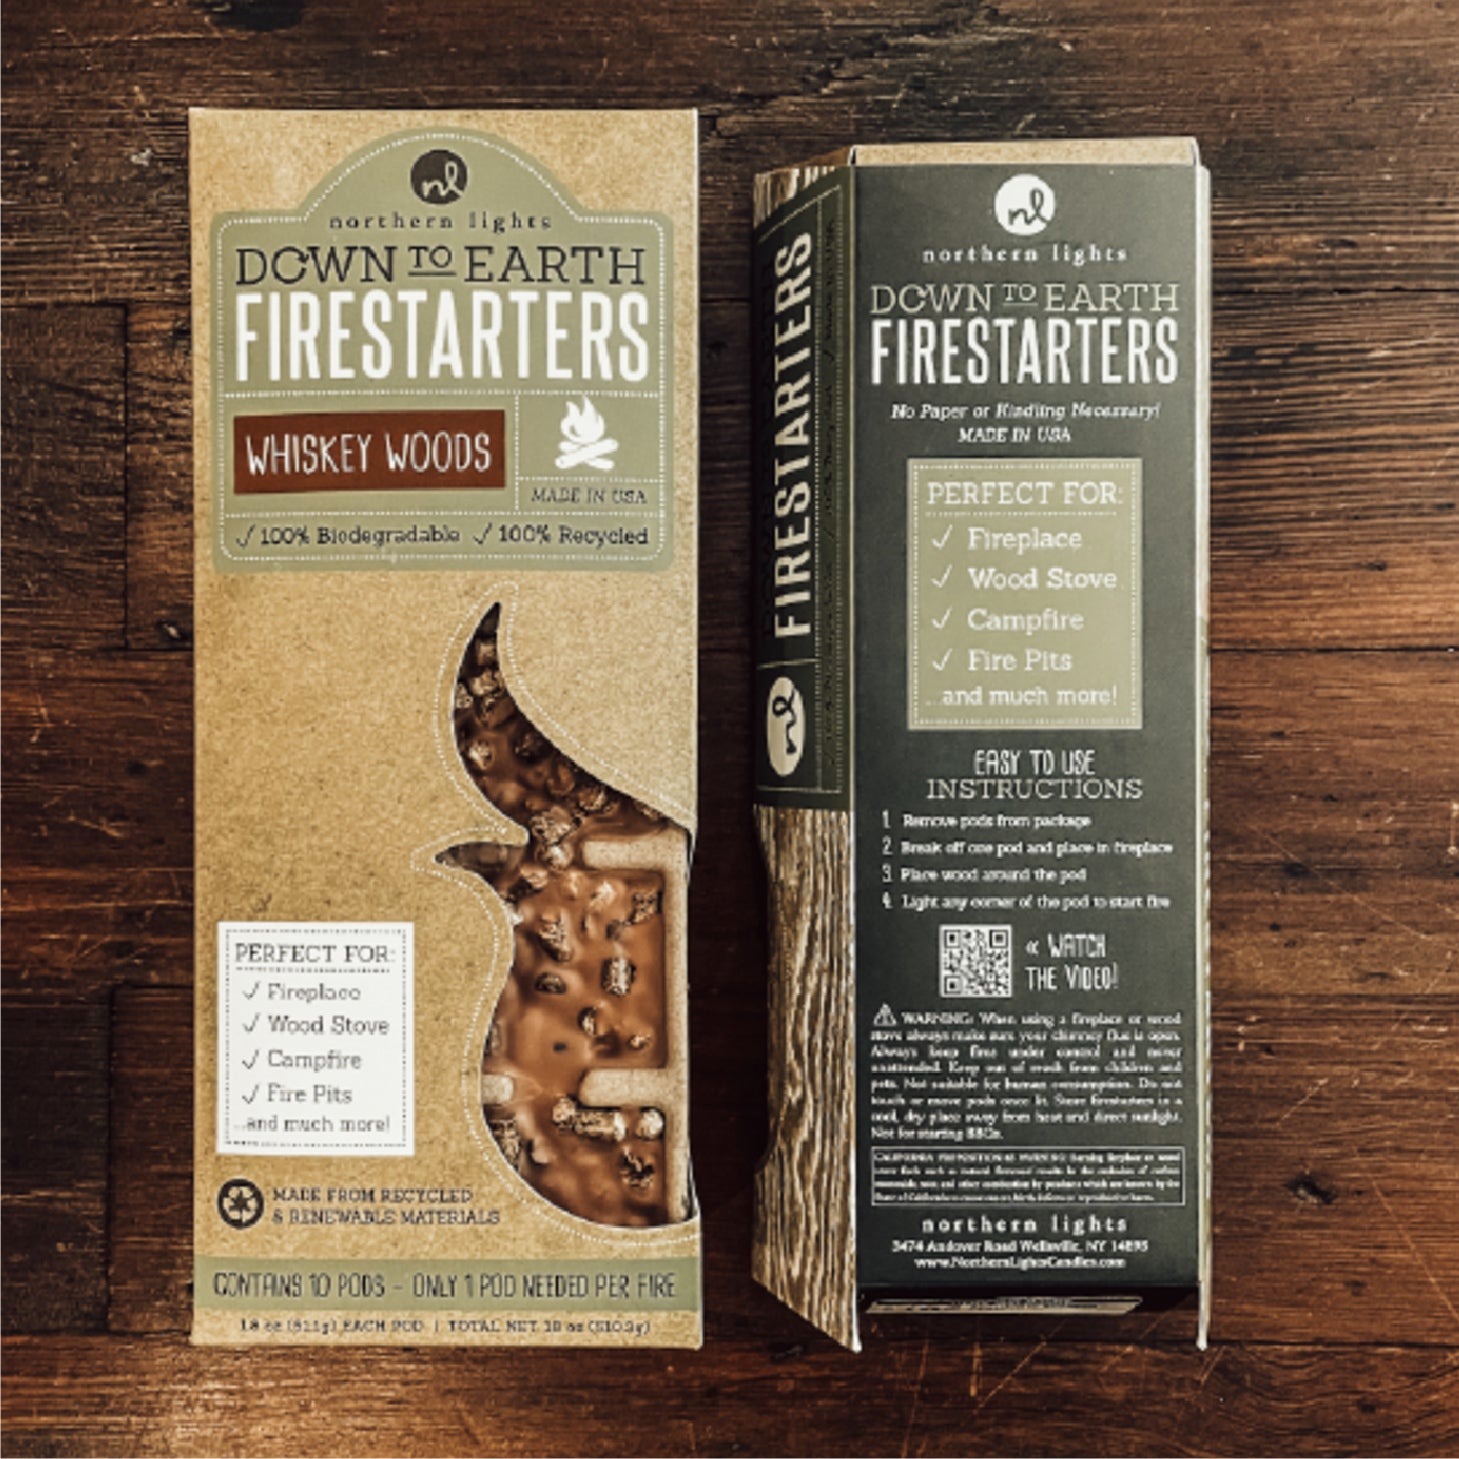 Down To Earth Firestarters- Whiskey Woods